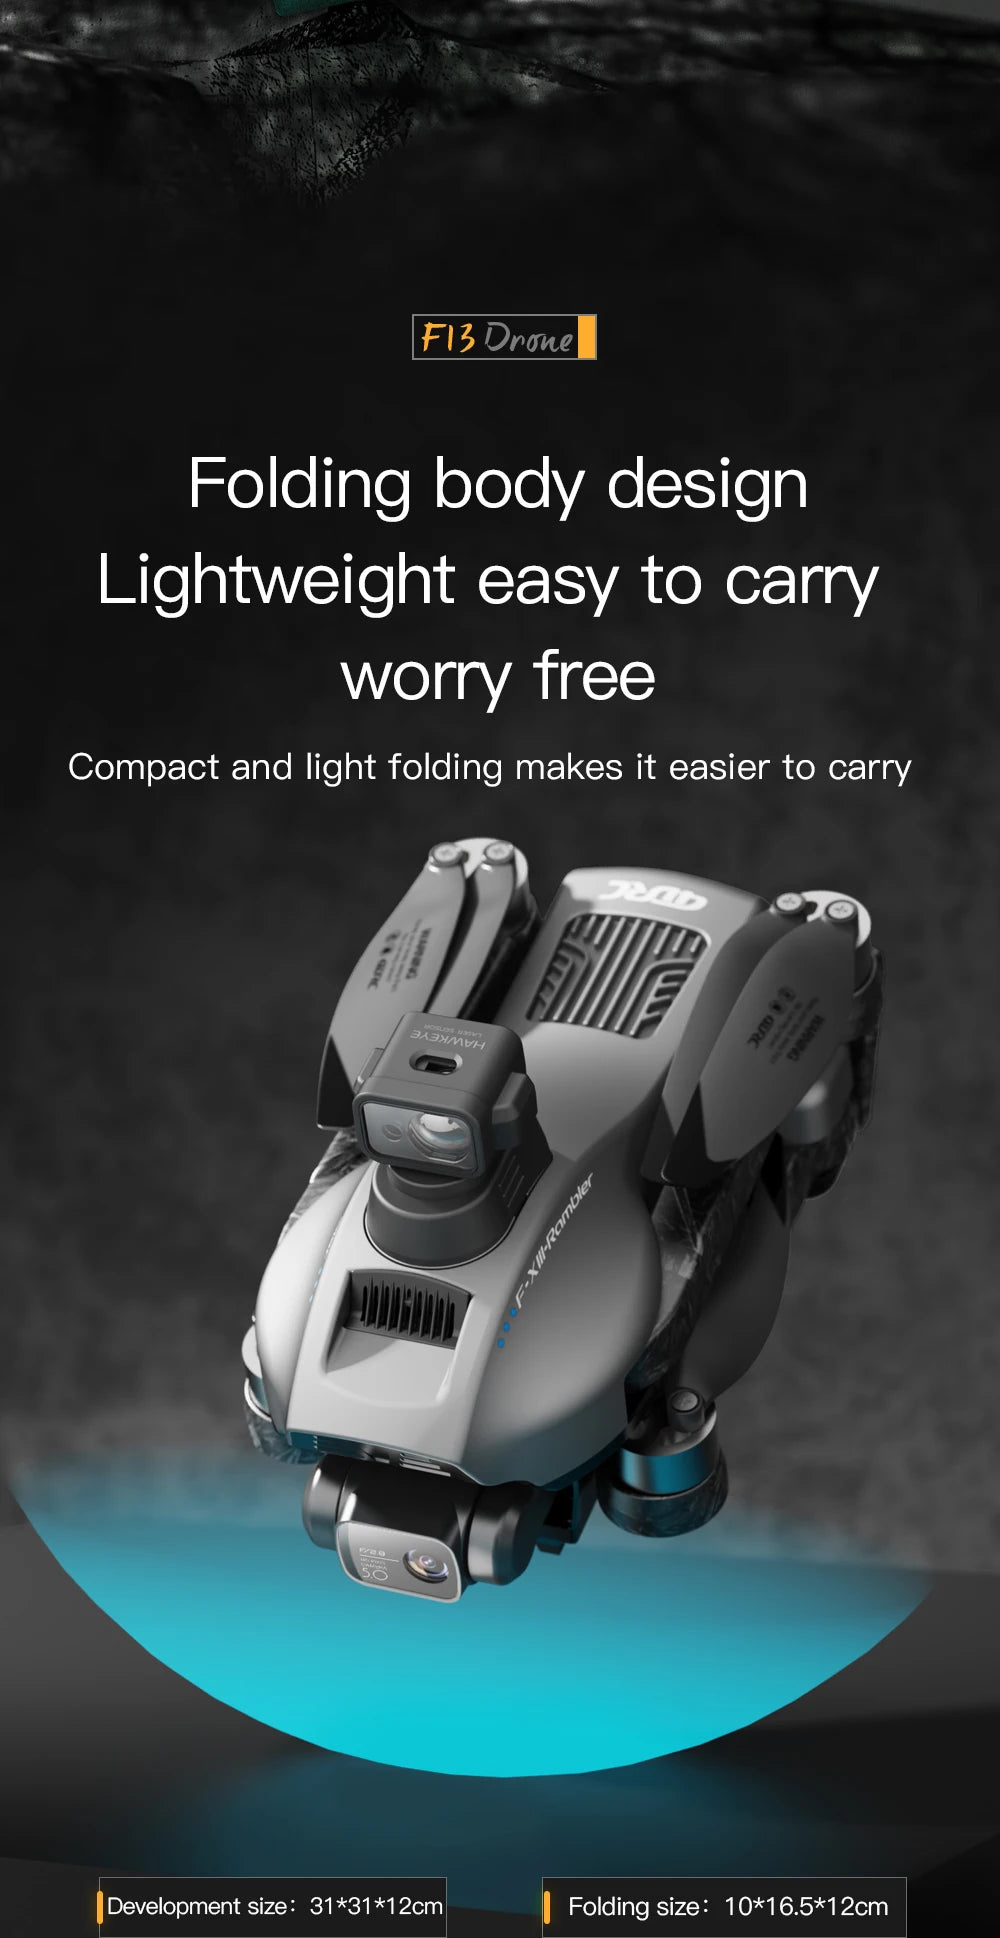 F13 Drone, Folding body design Lightweight easy to carry worry free Compact and light folding makes it easier to